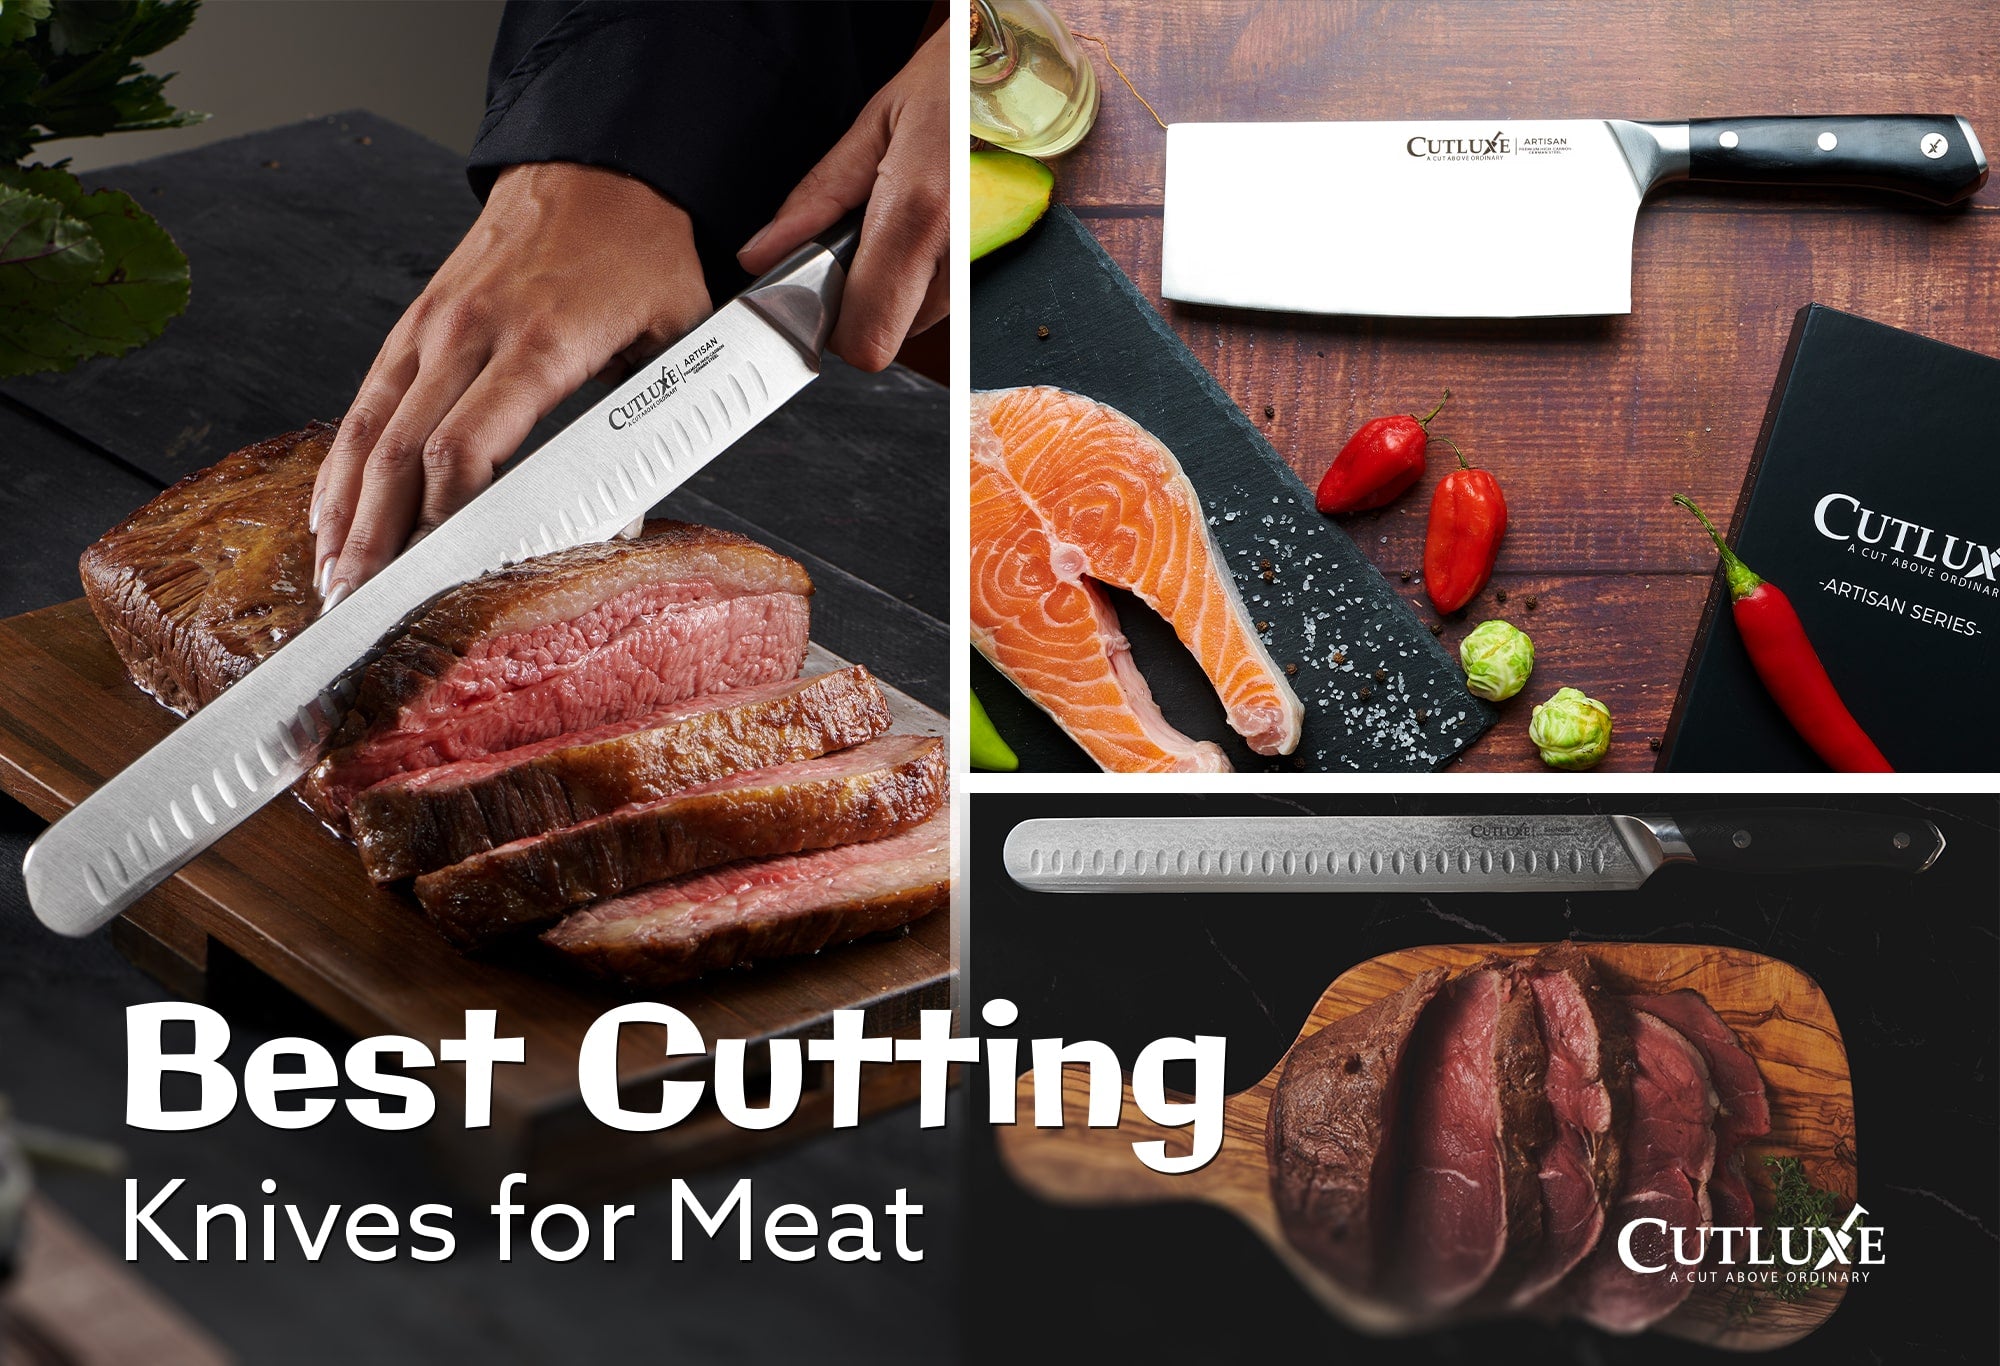 The Best Cutting Knives For Meat